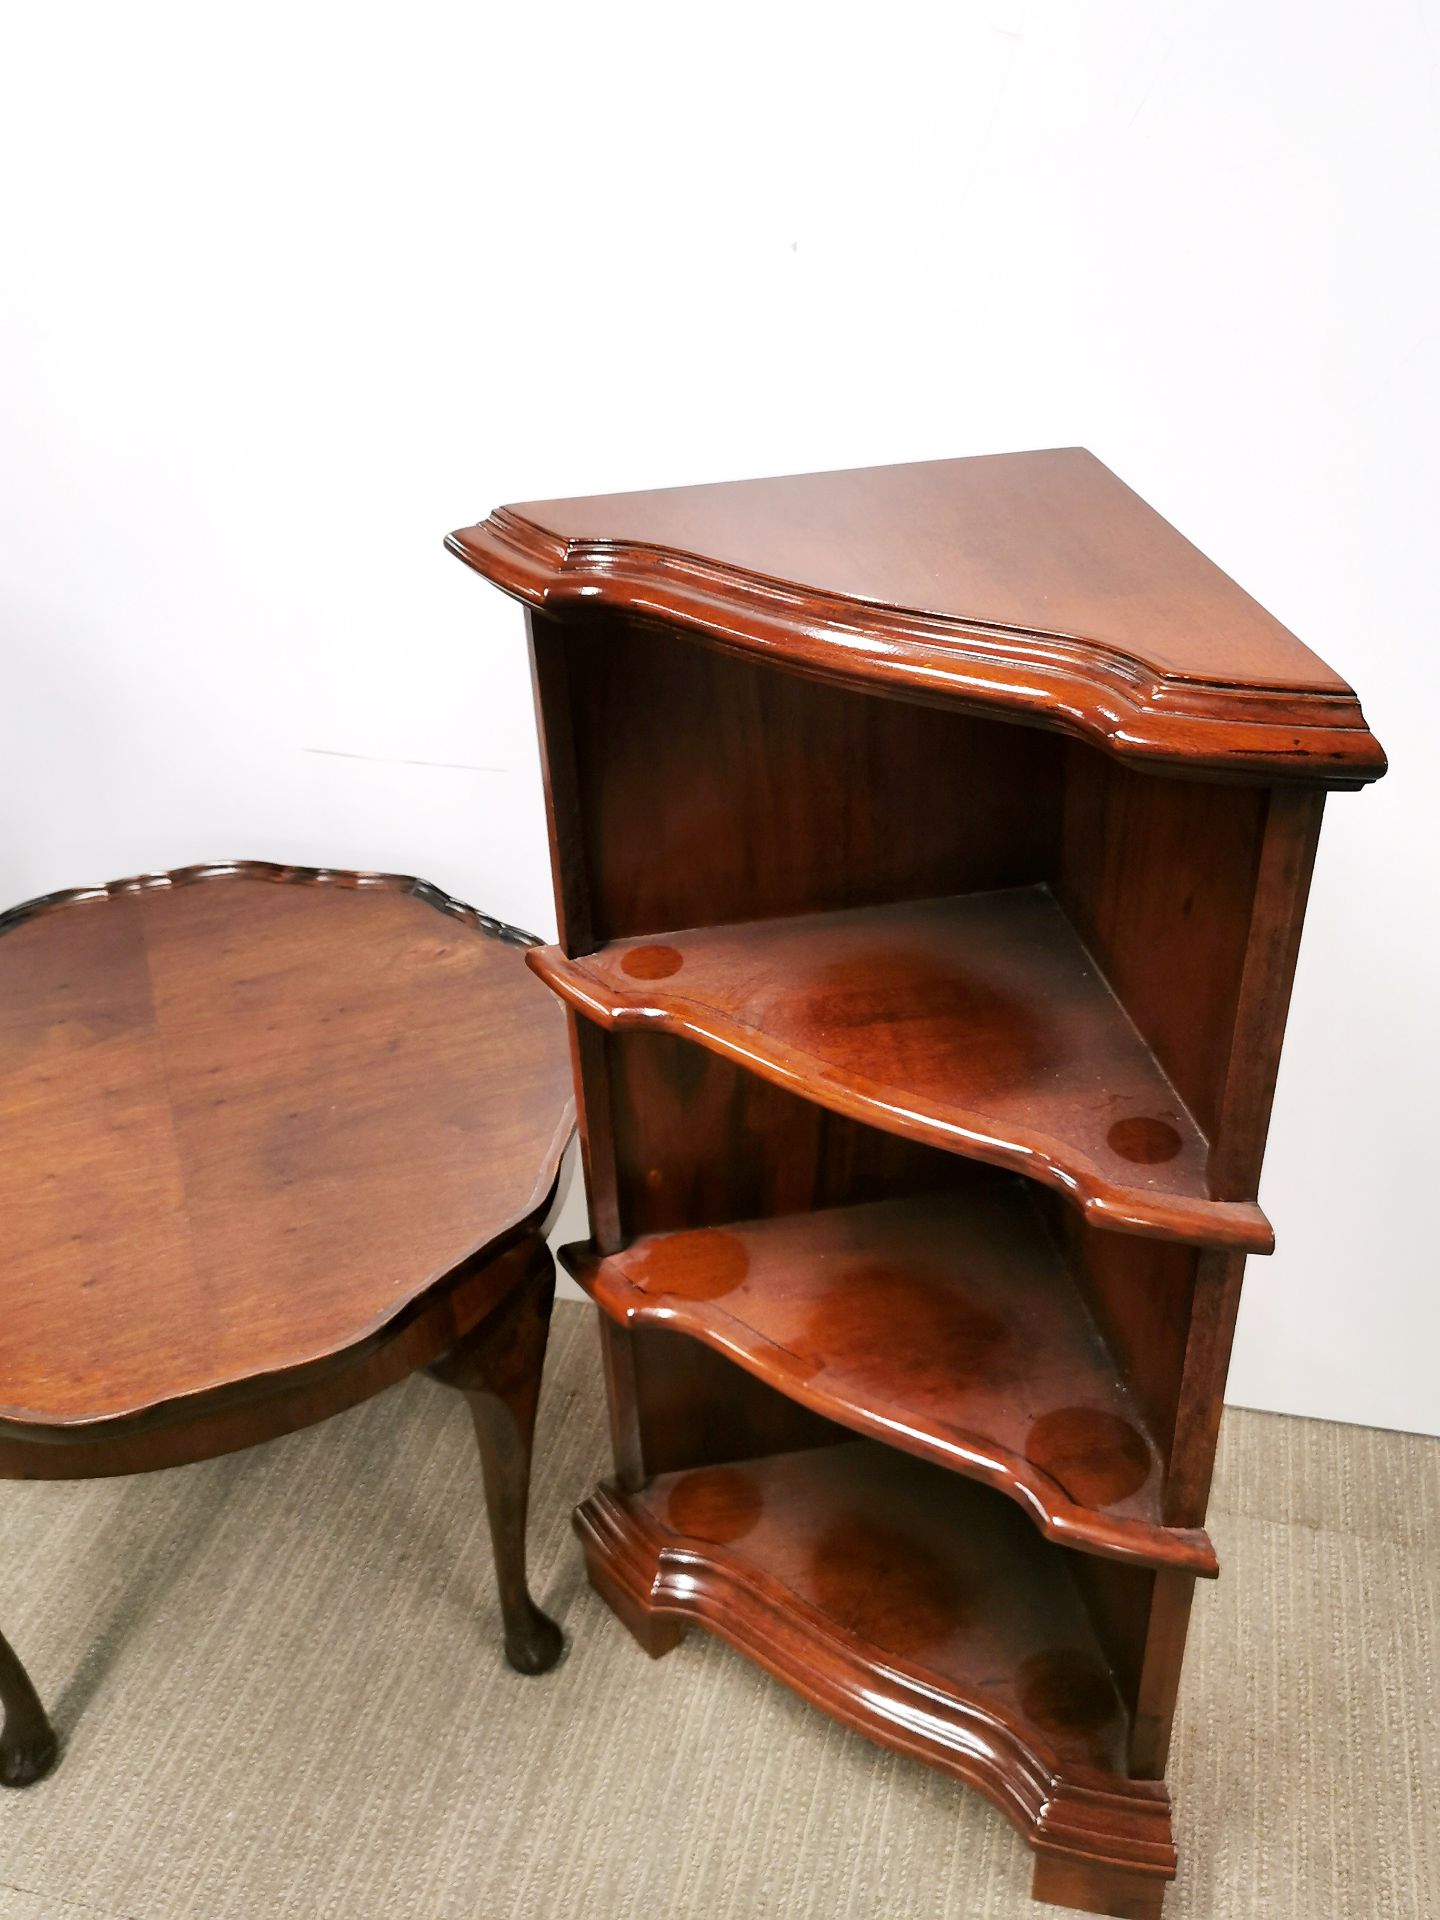 A mahogany ball and claw foot wine table, together with small side table and two corner shelves. - Image 3 of 3